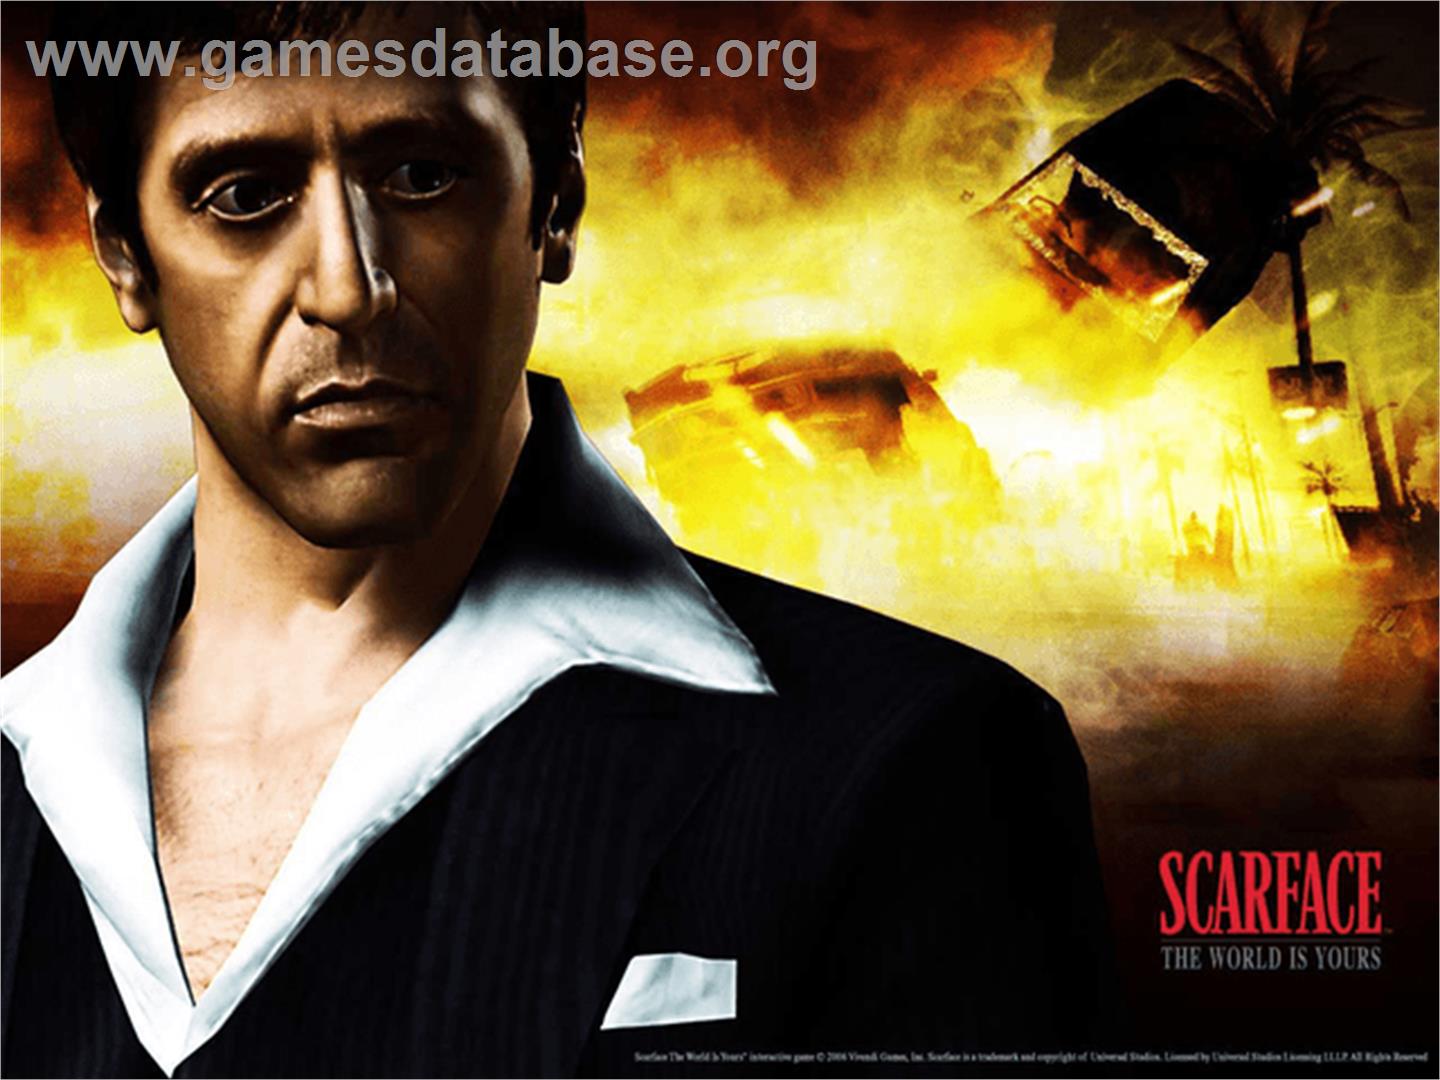 Scarface: The World is Yours - Microsoft Xbox - Artwork - Title Screen